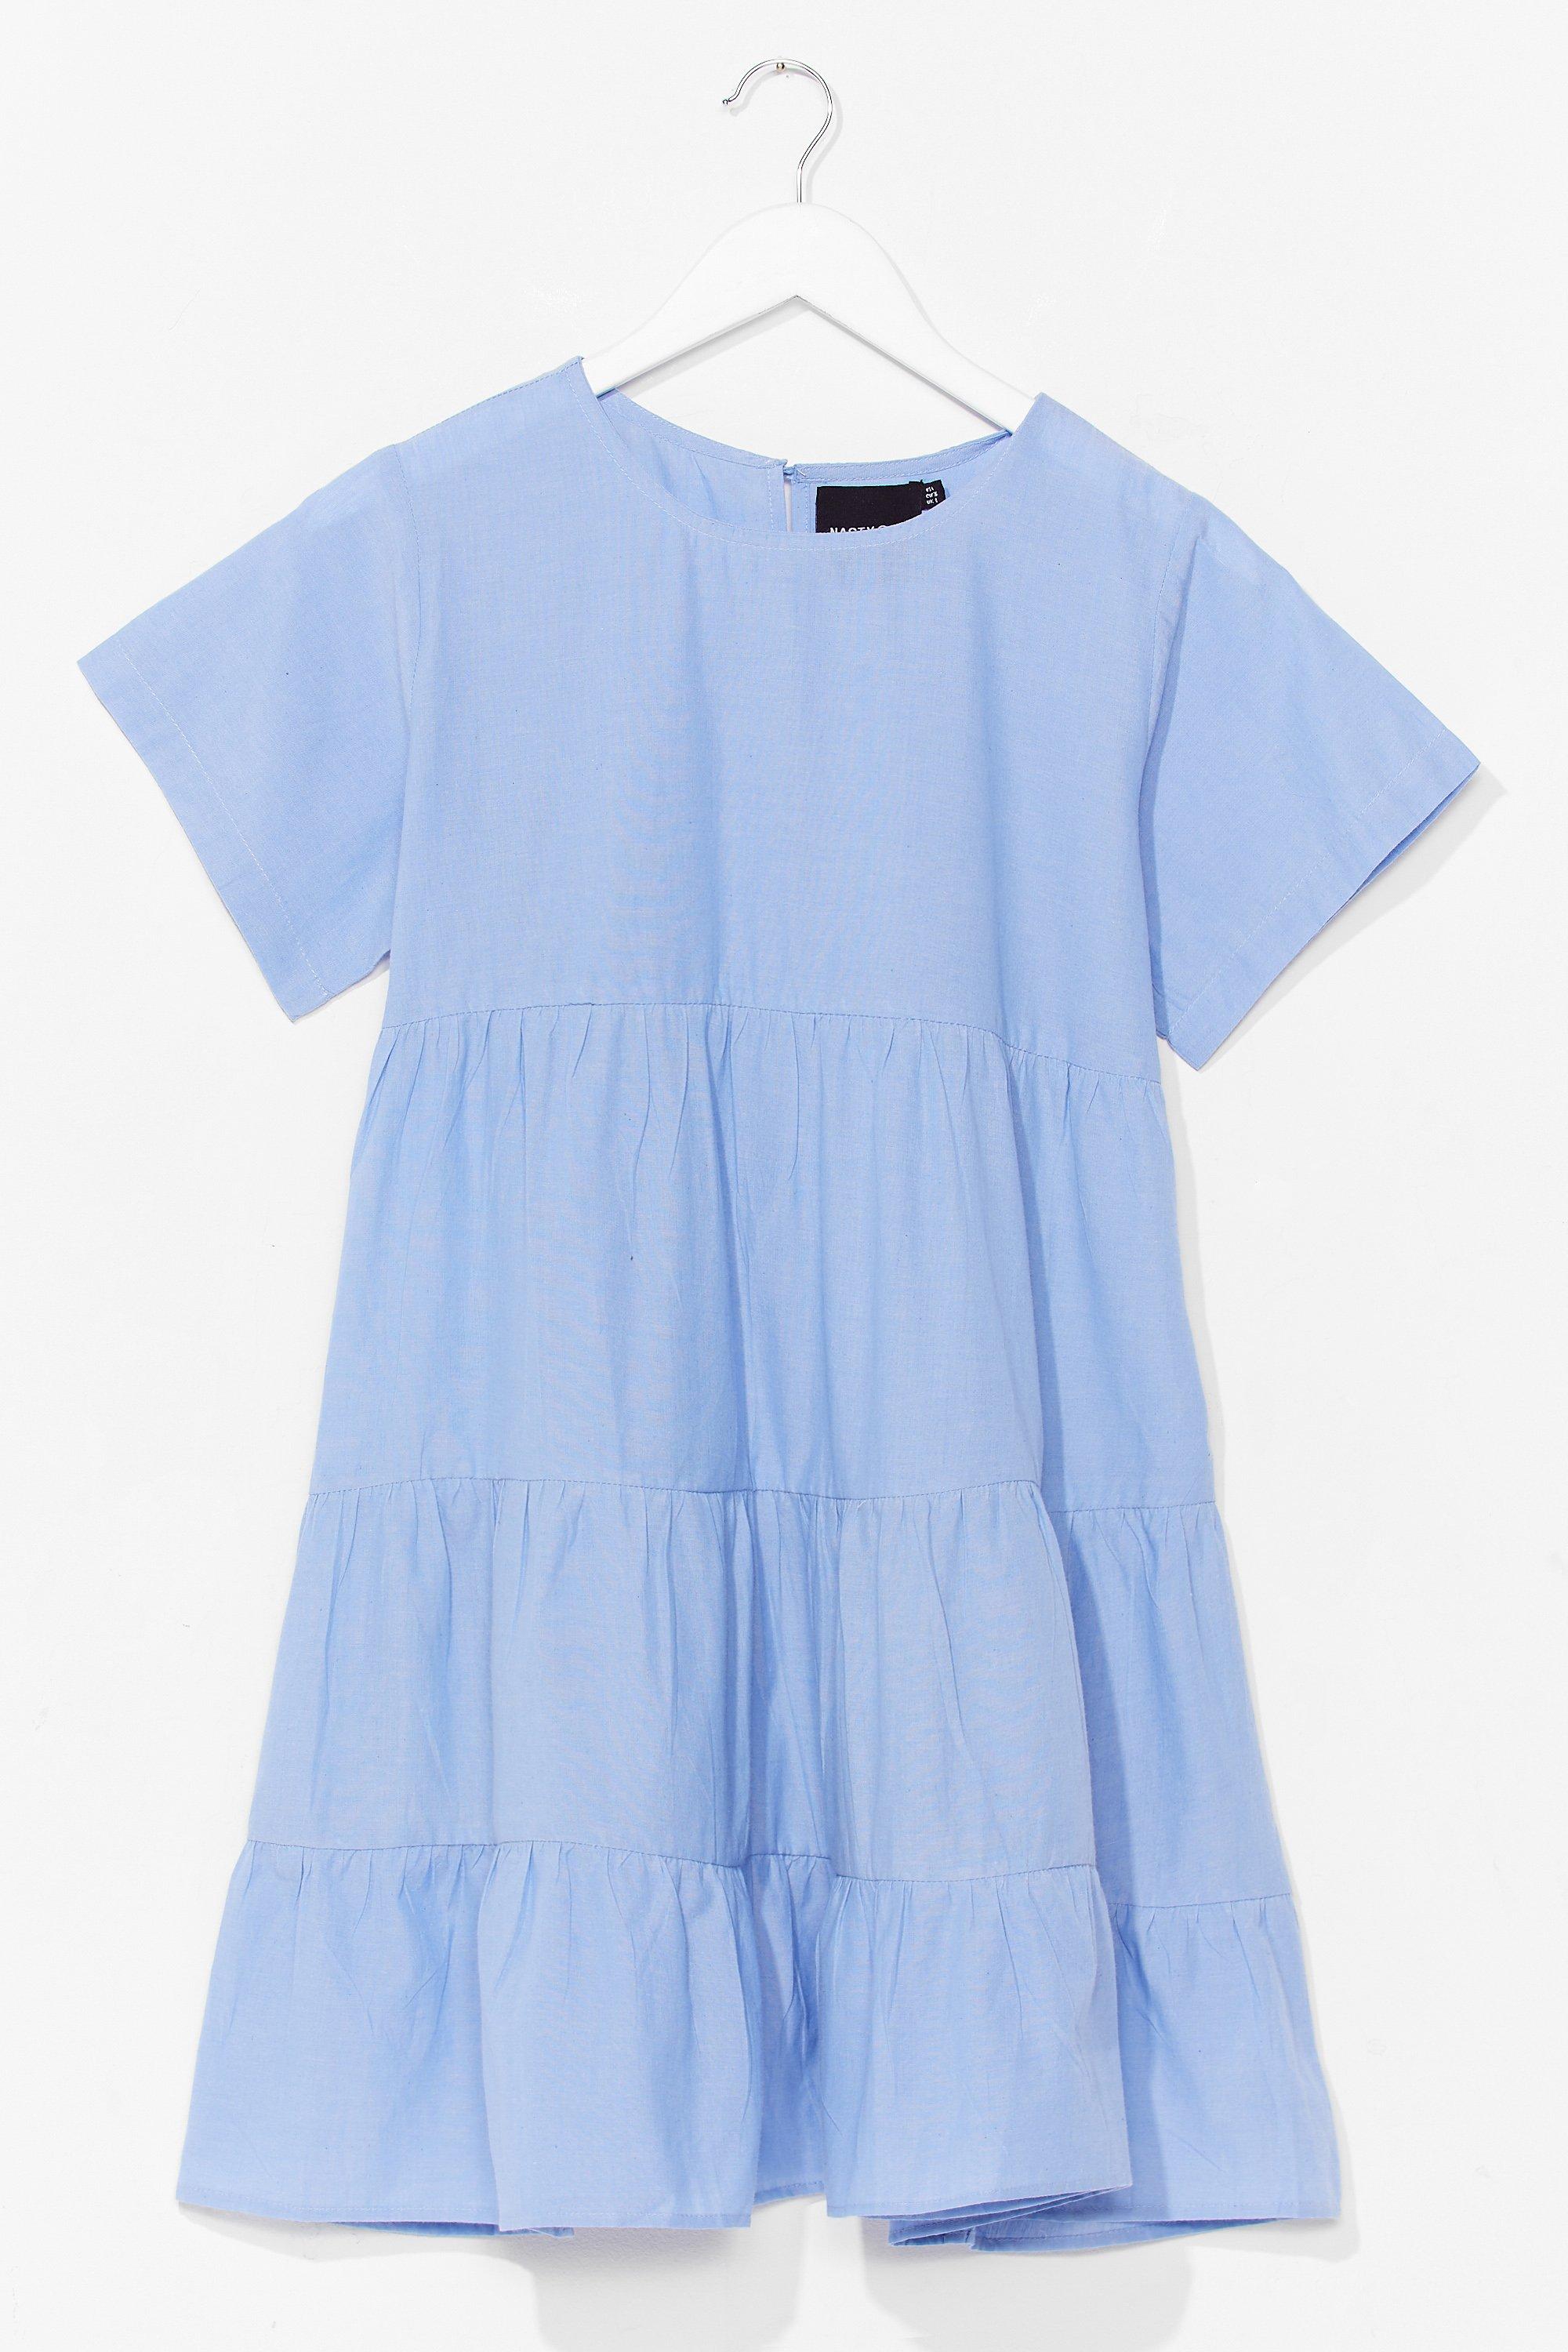 baby blue clothes